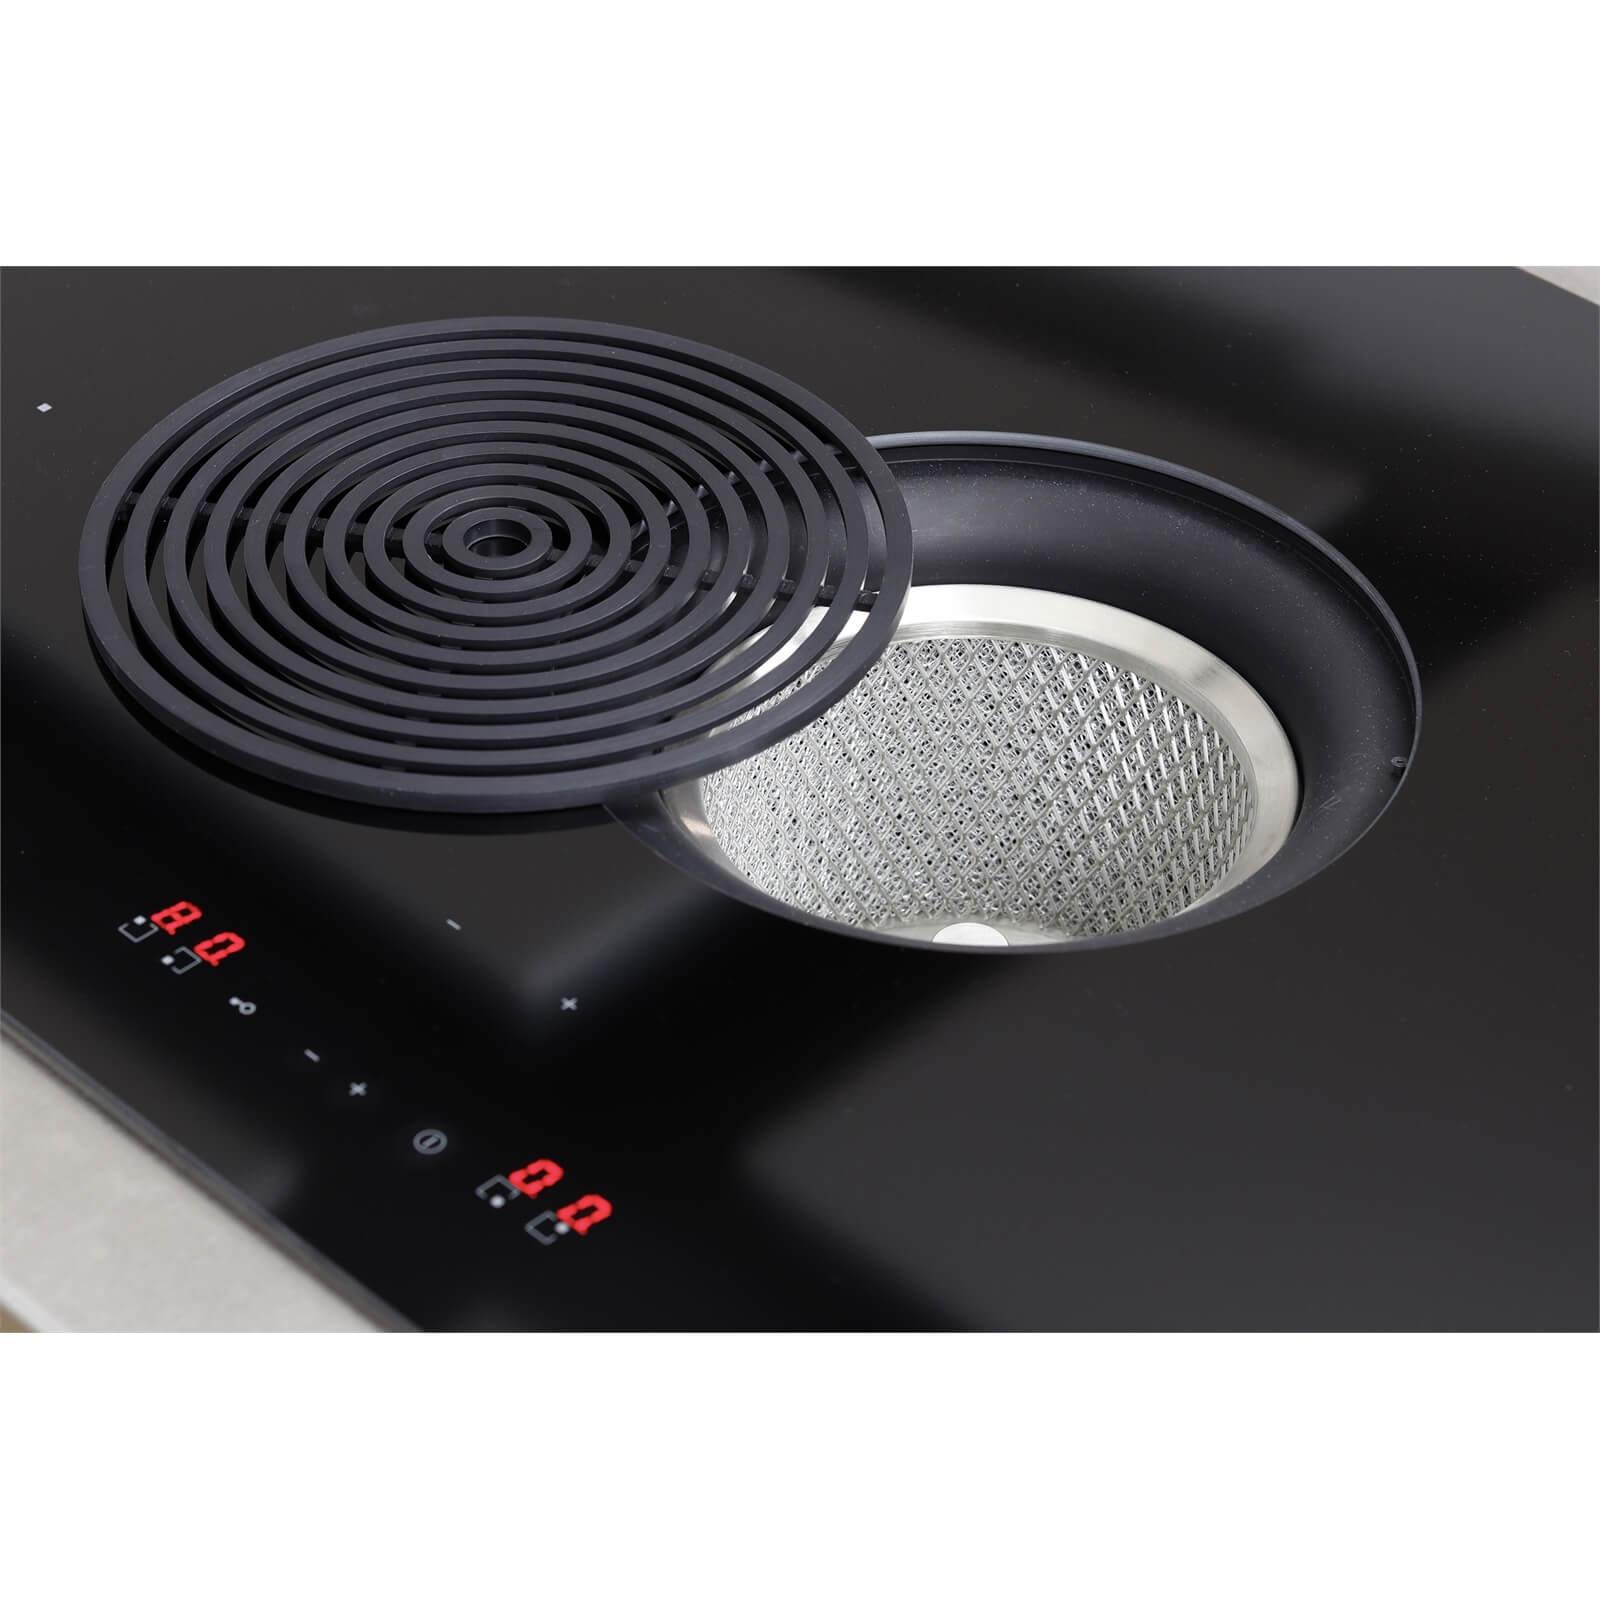 Inox Evo BE 870mm Vented Induction Hob - Ducted